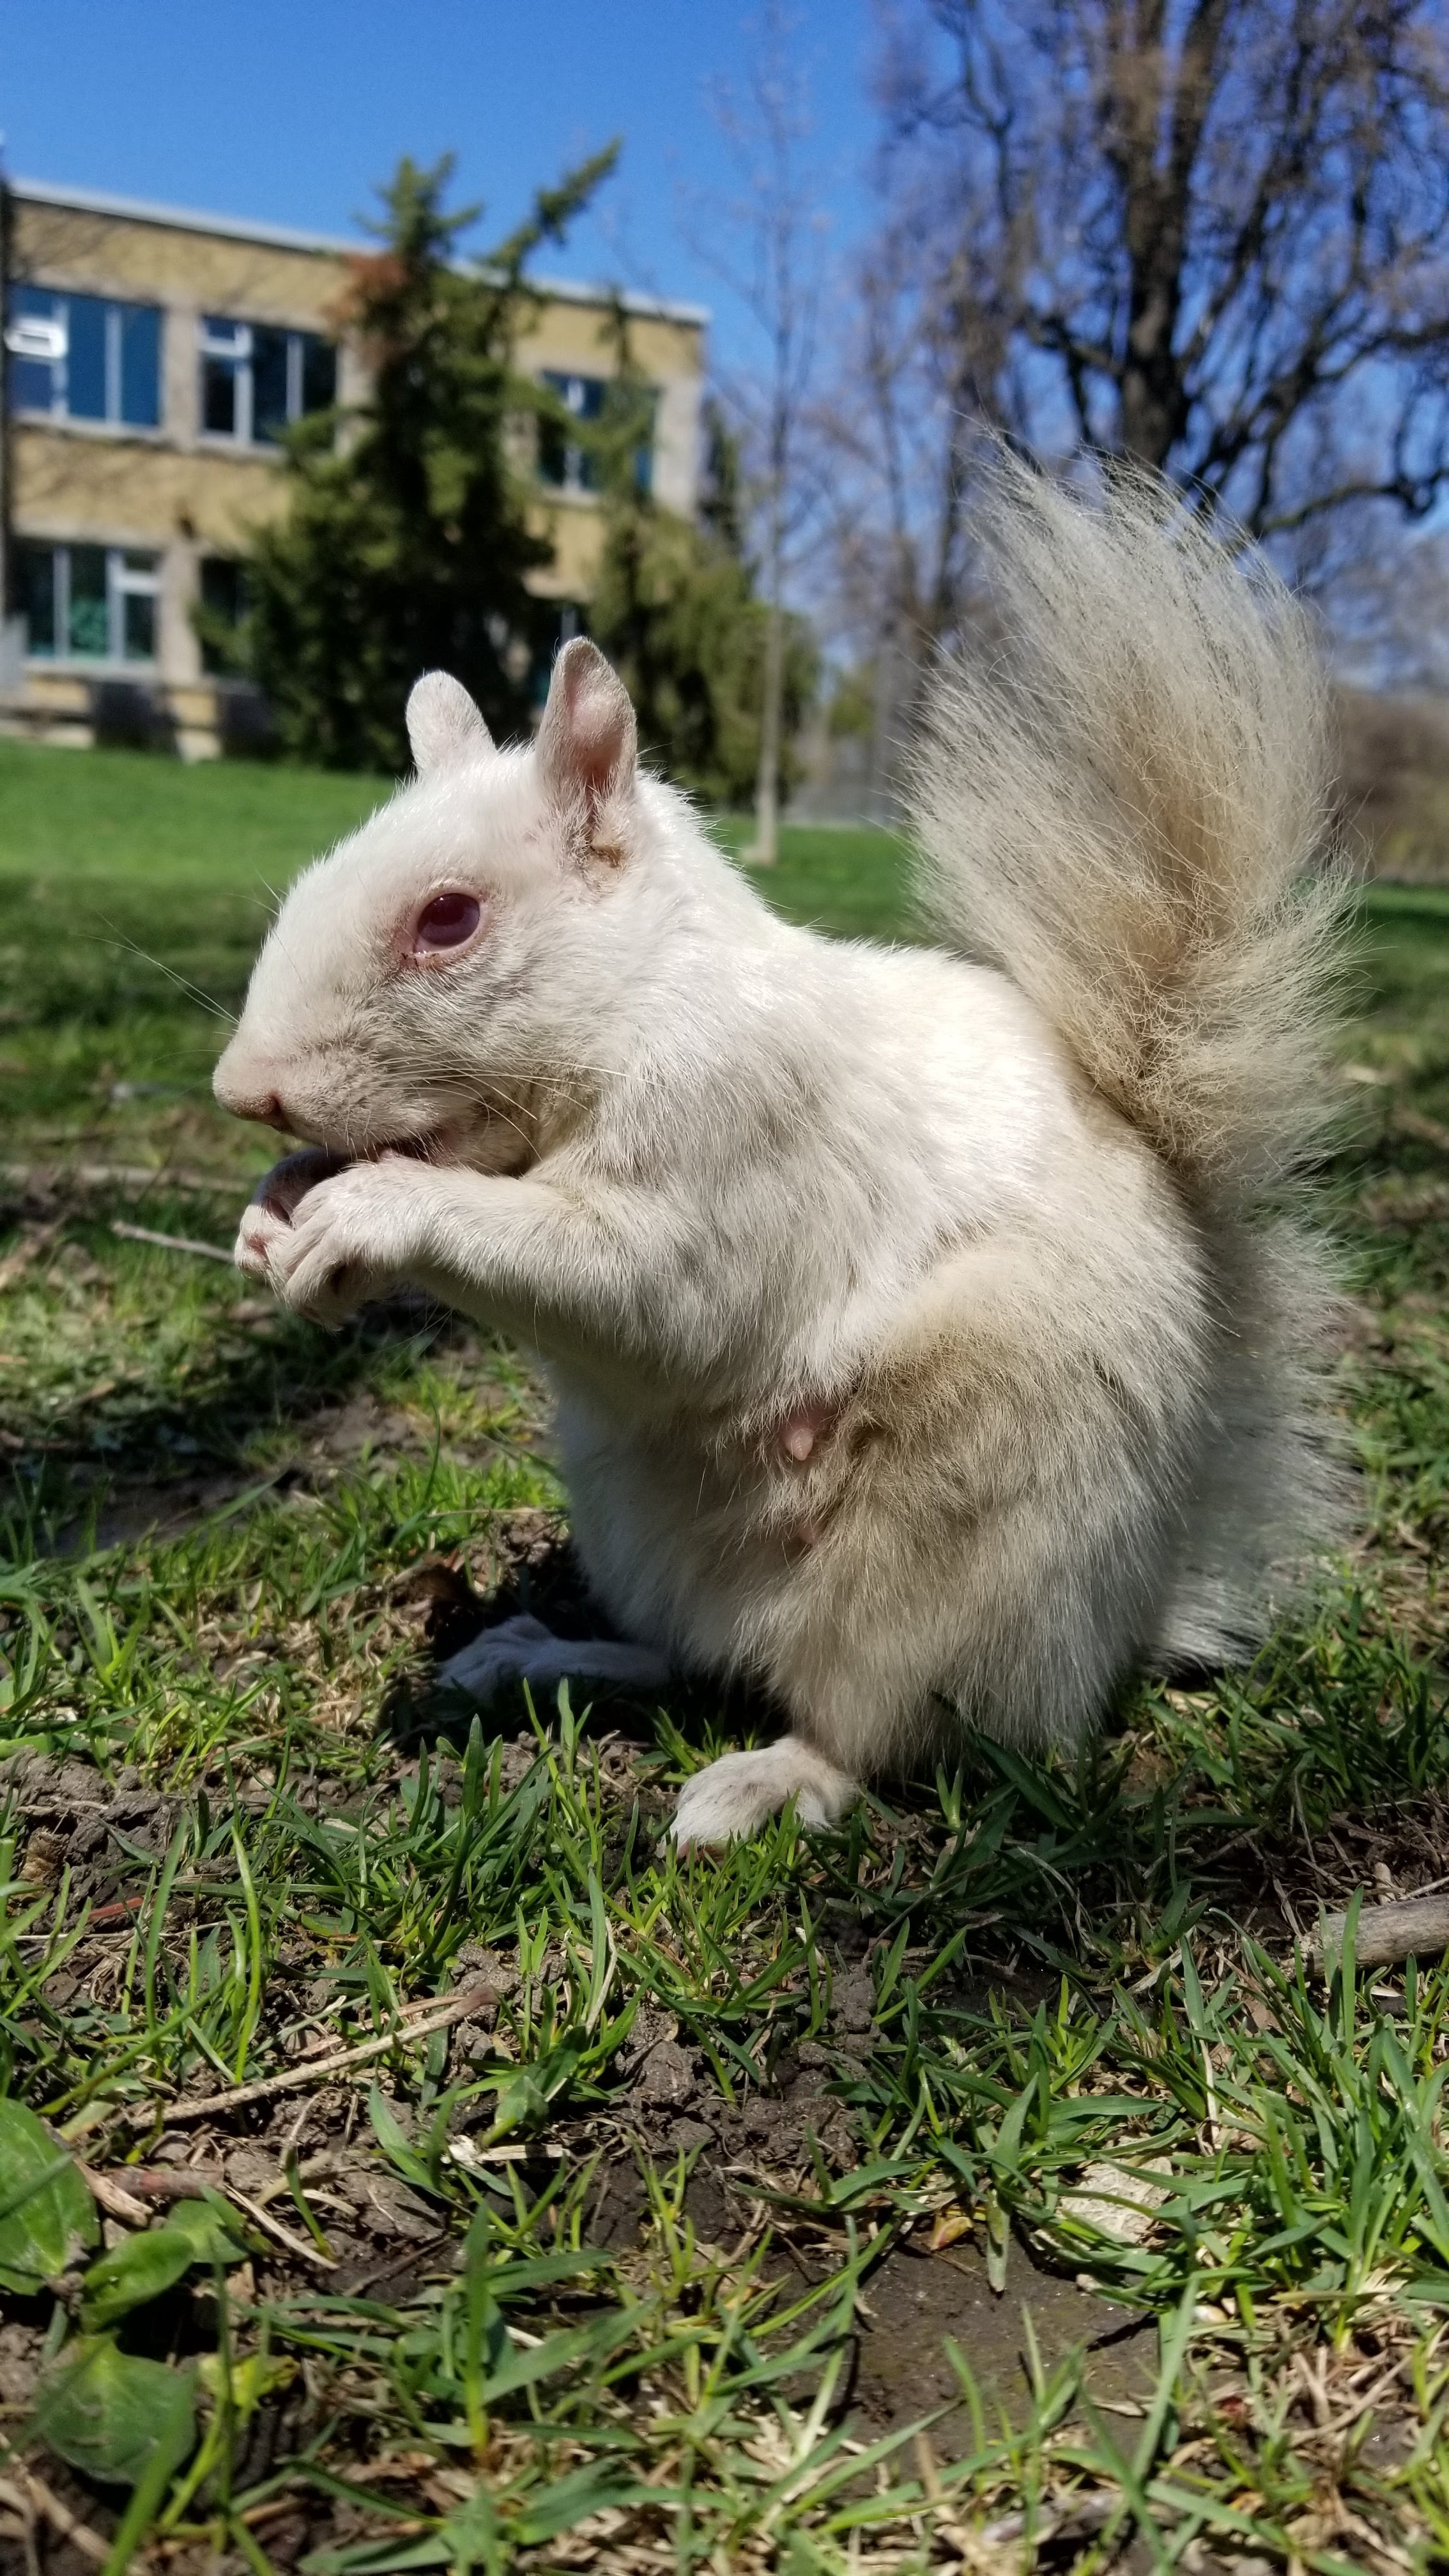 Steel White Squirrel with Wood Stand